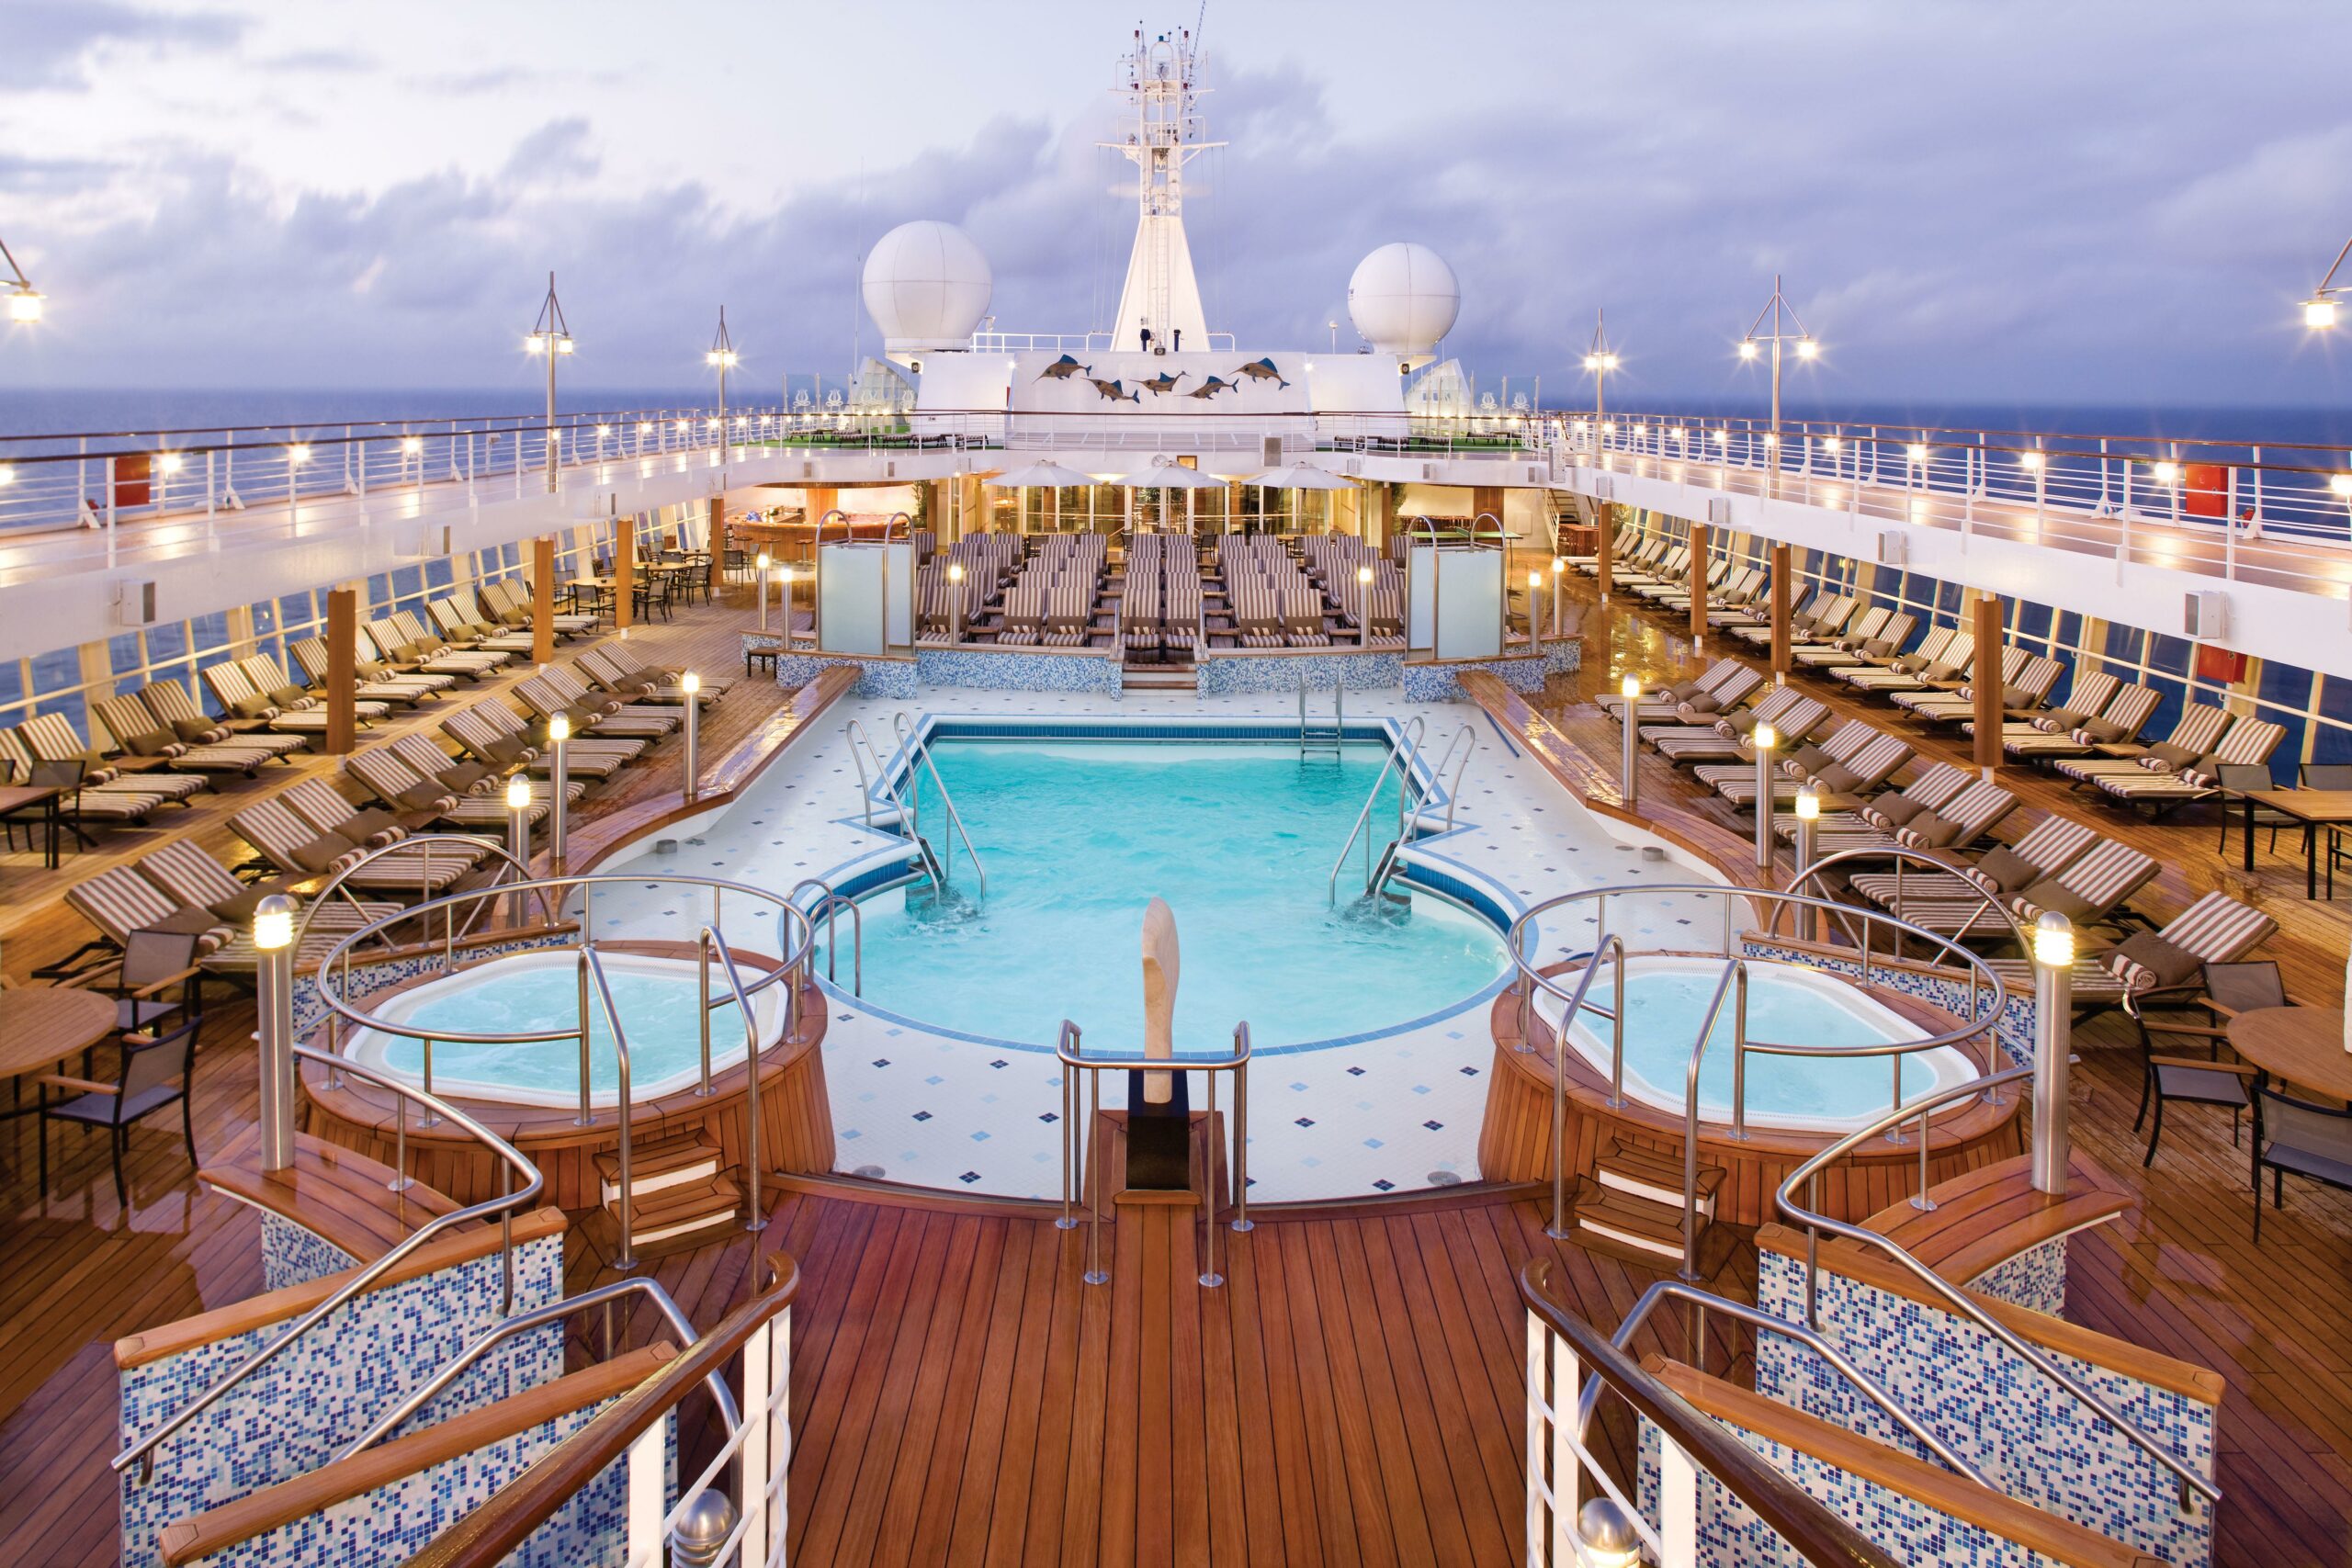 Pool deck of Seven Seas Voyager. Photo by Regent Seven Seas Cruises.